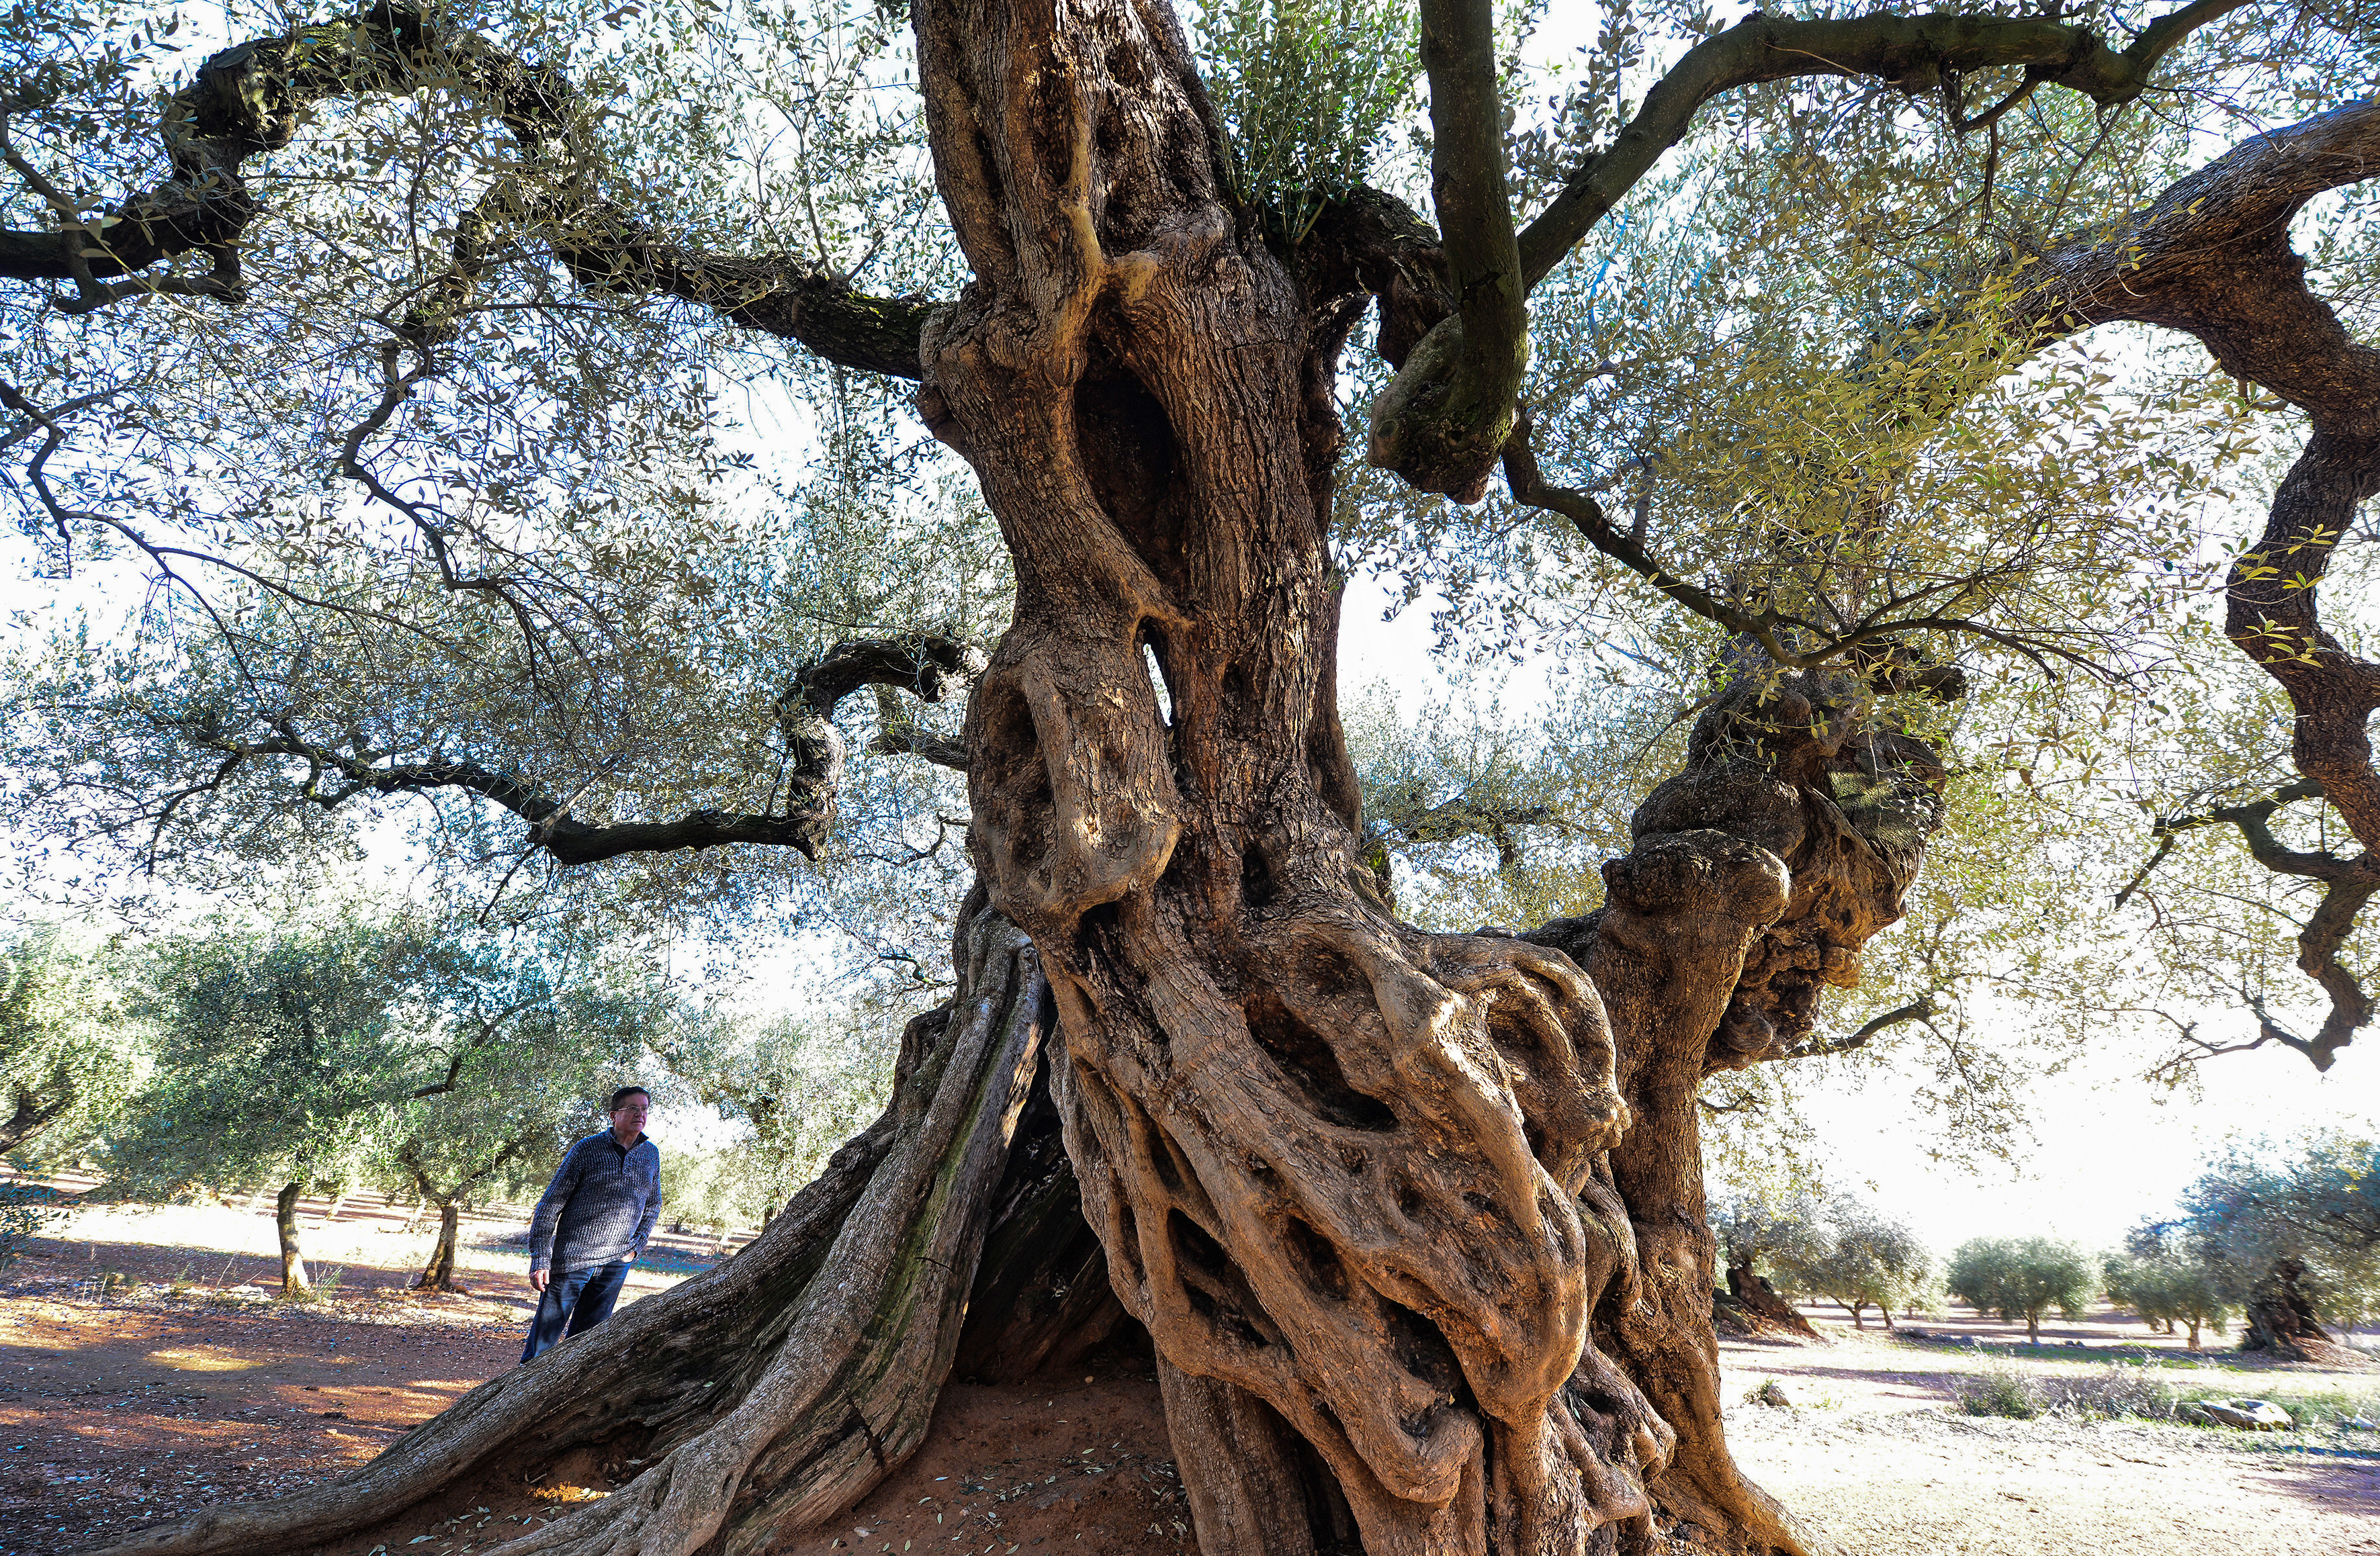 A man looks at the millennia old olive tree, famous for "staring" in the film "the Olive" by Spanish director Iciar Bollain , in an olive grove in the municipality of Uldecona, on December 6, 2016. The sun sets in eastern Spain and dozens of ancient olive trees cast long shadows on the ground.  / AFP PHOTO / JOSE JORDAN / TO GO WITH AFP STORY BY Michaela CANCELA-KIEFFER